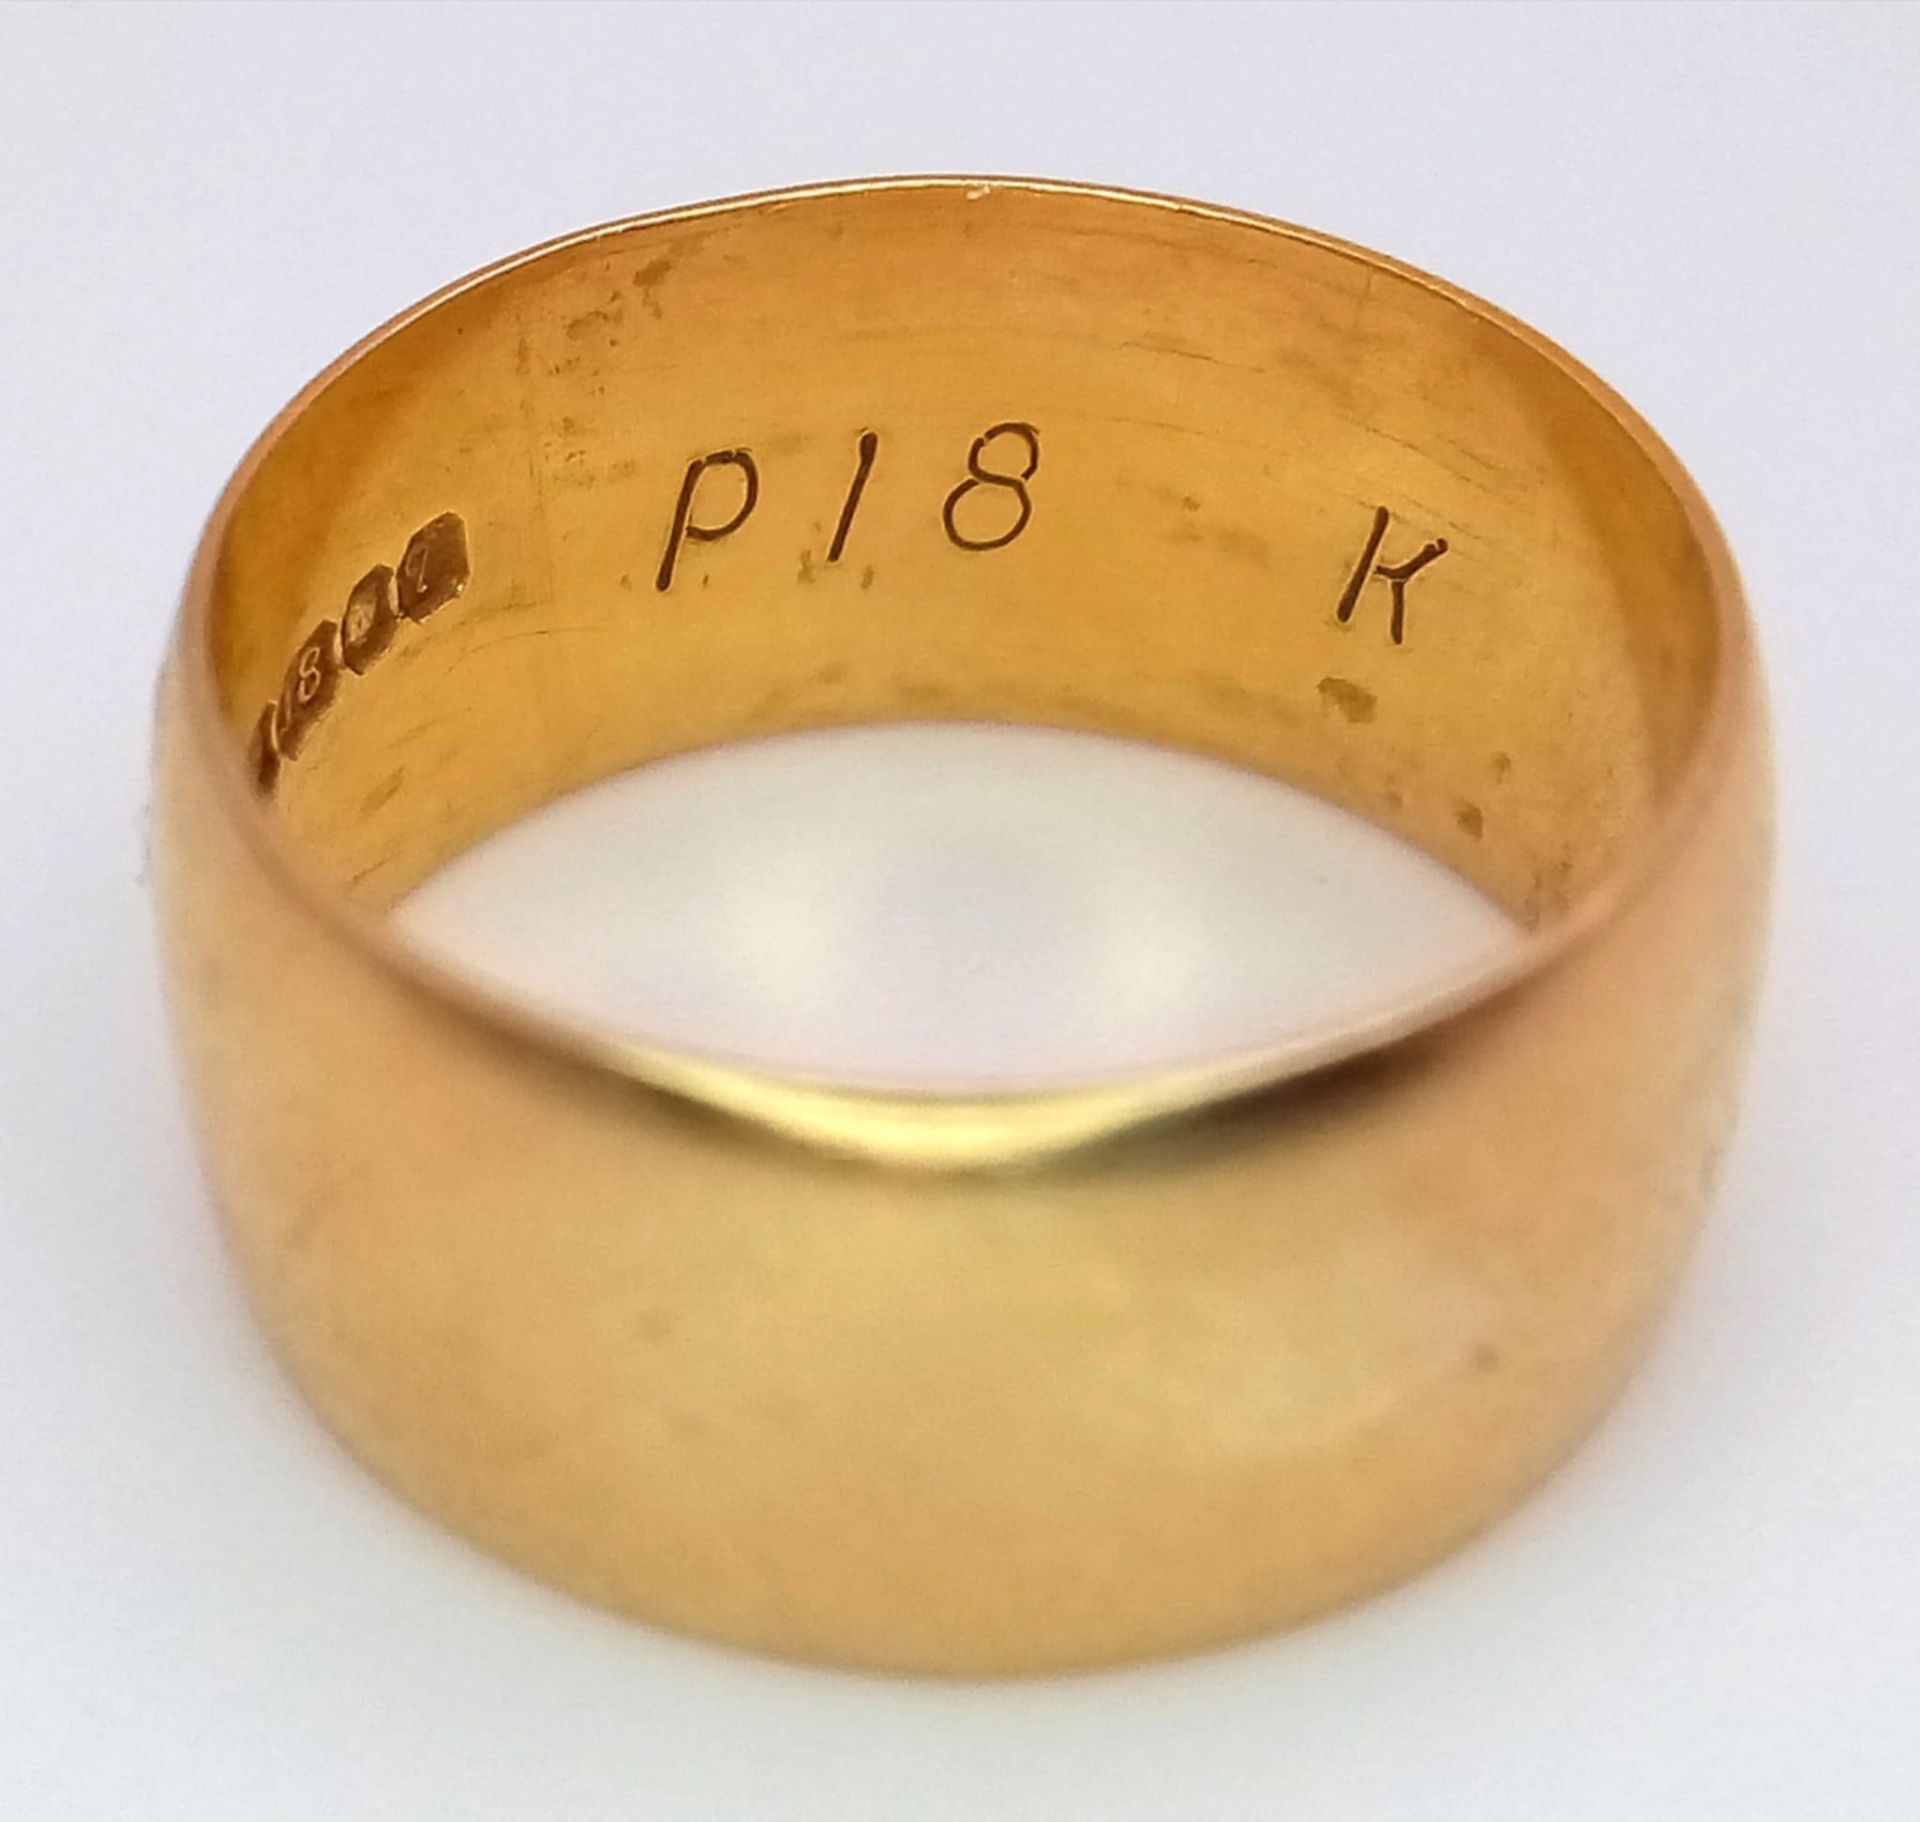 A Vintage 18K Yellow Gold Band Ring. 8mm width. Size K. 5.3g weight. Full UK hallmarks. - Image 3 of 4